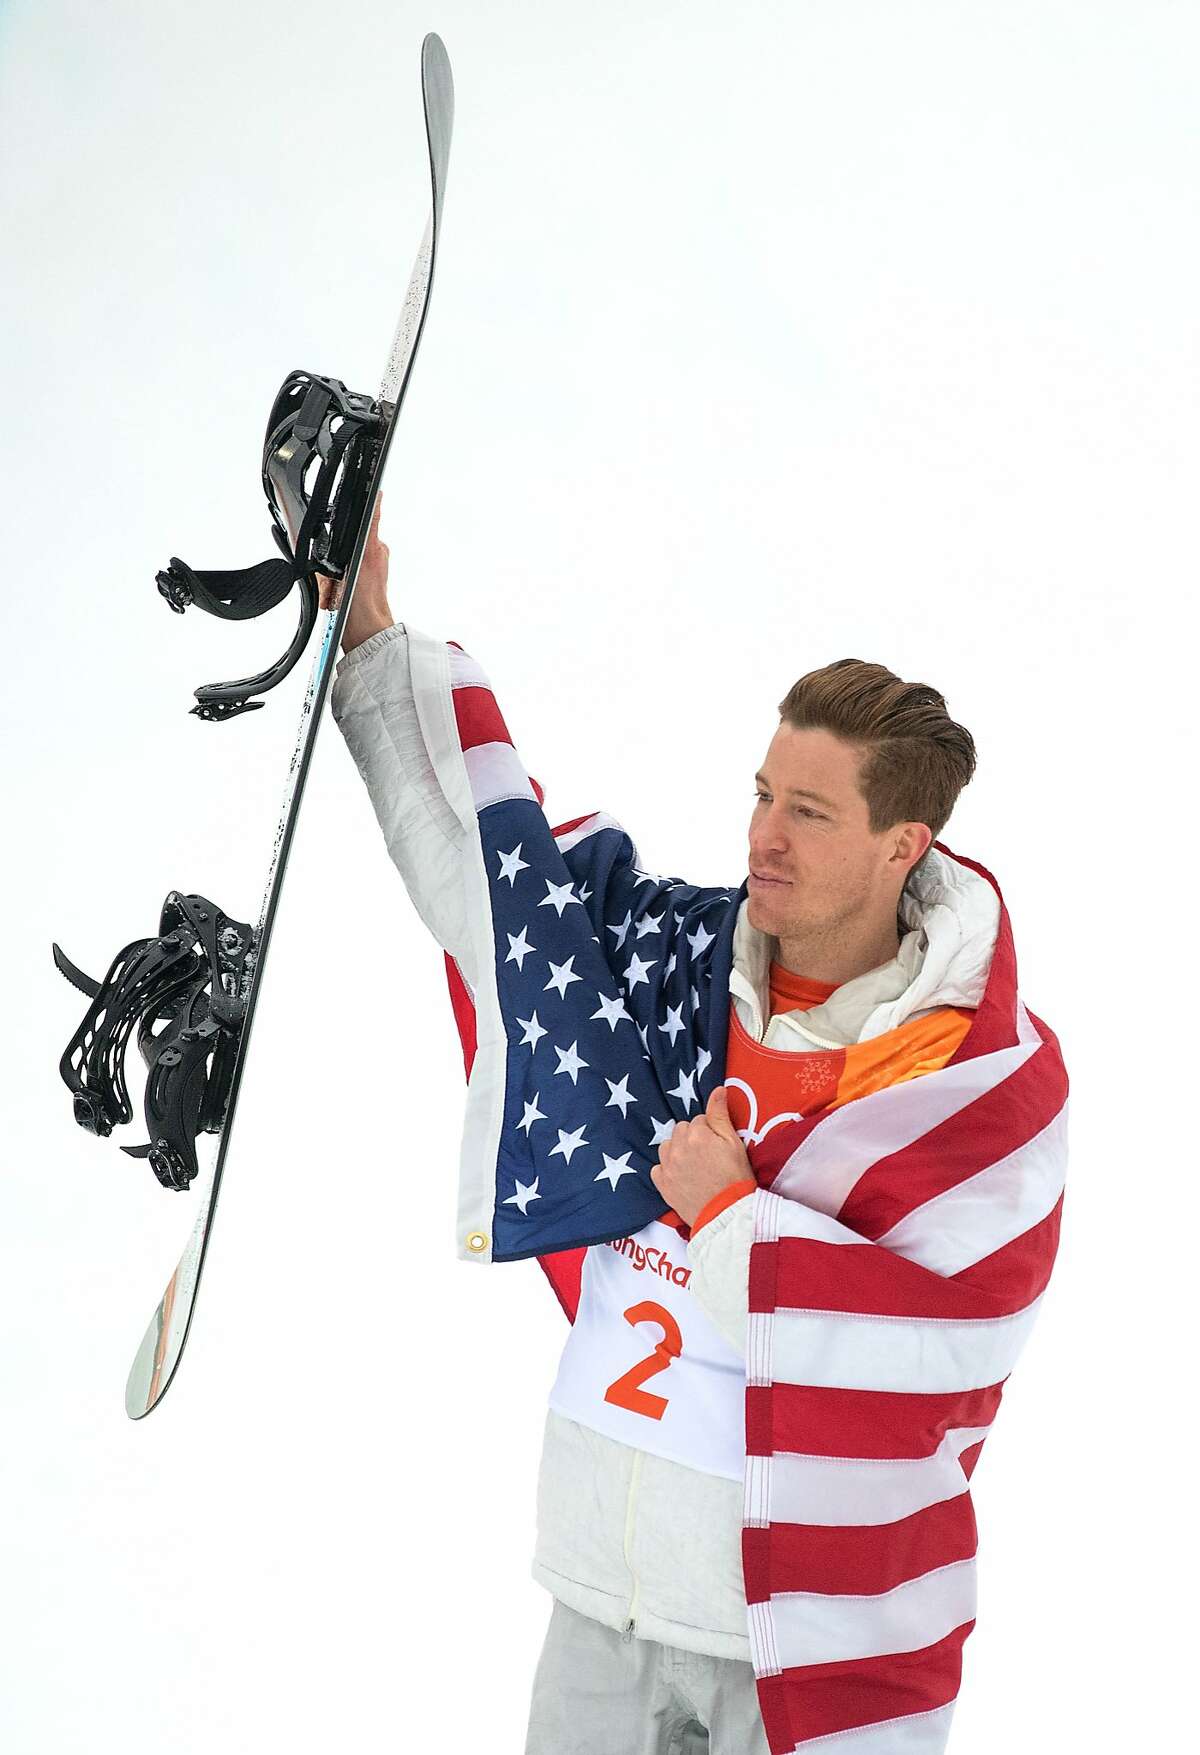 PYEONGCHANG-GUN, SOUTH KOREA - FEBRUARY 14: Gold medalist Shaun White of the United States celebrates during the victory ceremony for the Snowboard Men's Halfpipe Final on day five of the Pyeongchang 2018 Winter Olympics at Phoenix Snow Park on February 14, 2018 in Pyeongchang-gun, South Korea. (Photo by David Ramos/Getty Images)